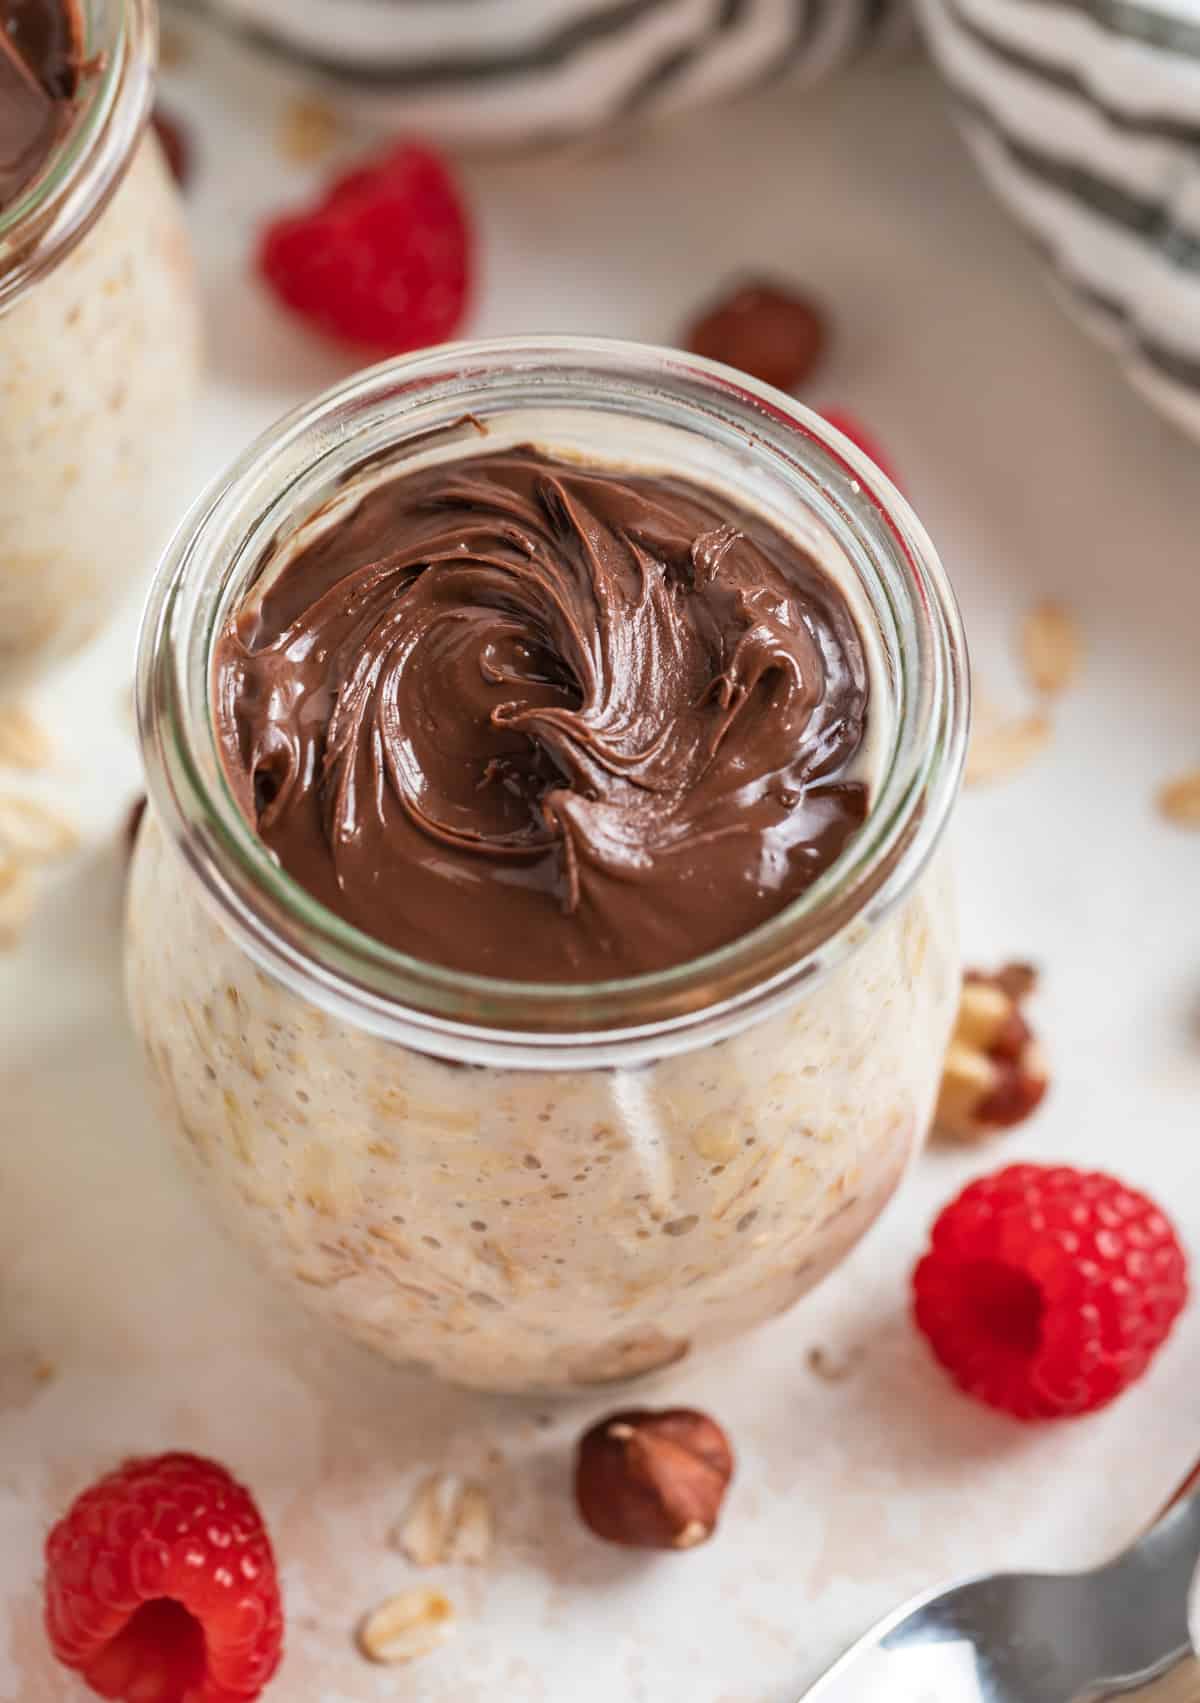 Jar of overnight oatmeal with nutella swirled on top and raspberries and hazelnuts beside.